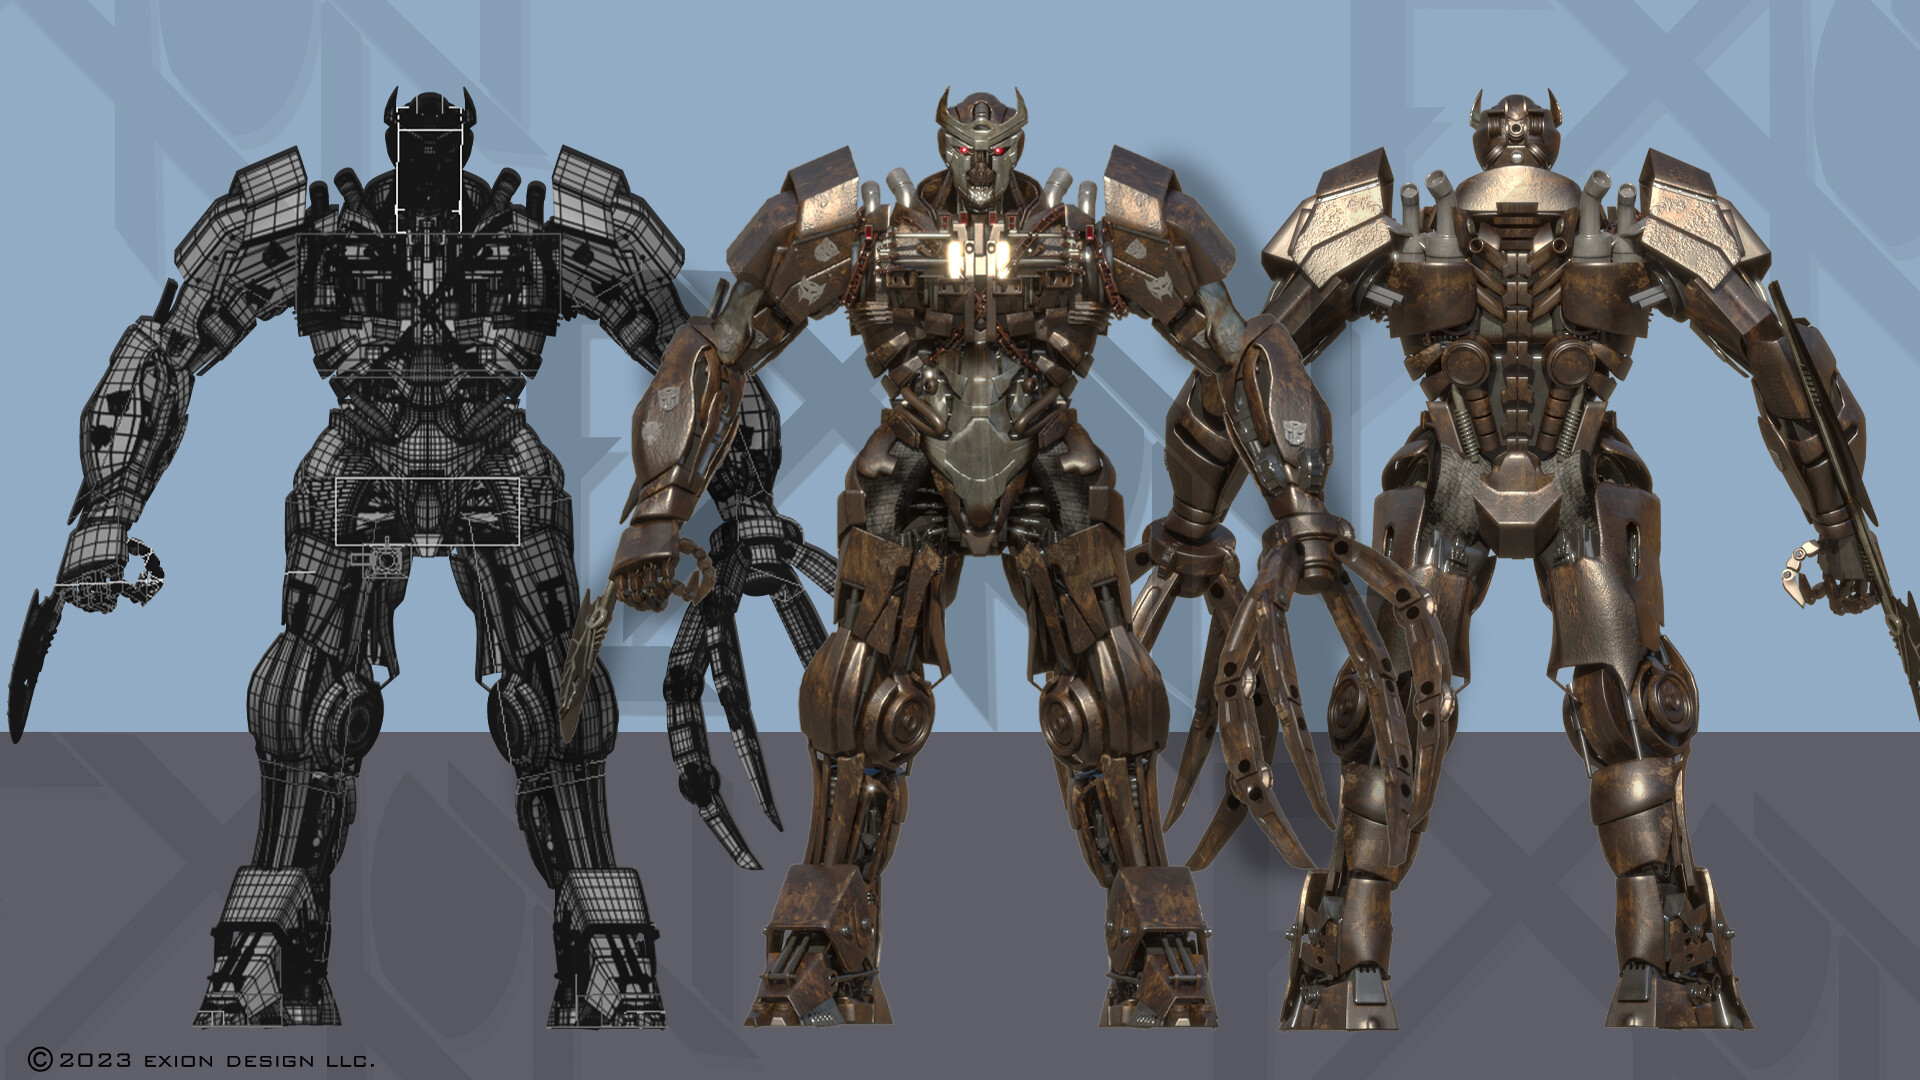 Transformers scourge. Scourge трансформер. Скурдж трансформер. Transformers Rise of the Beasts Scourge. Transformers 7 Scourge.